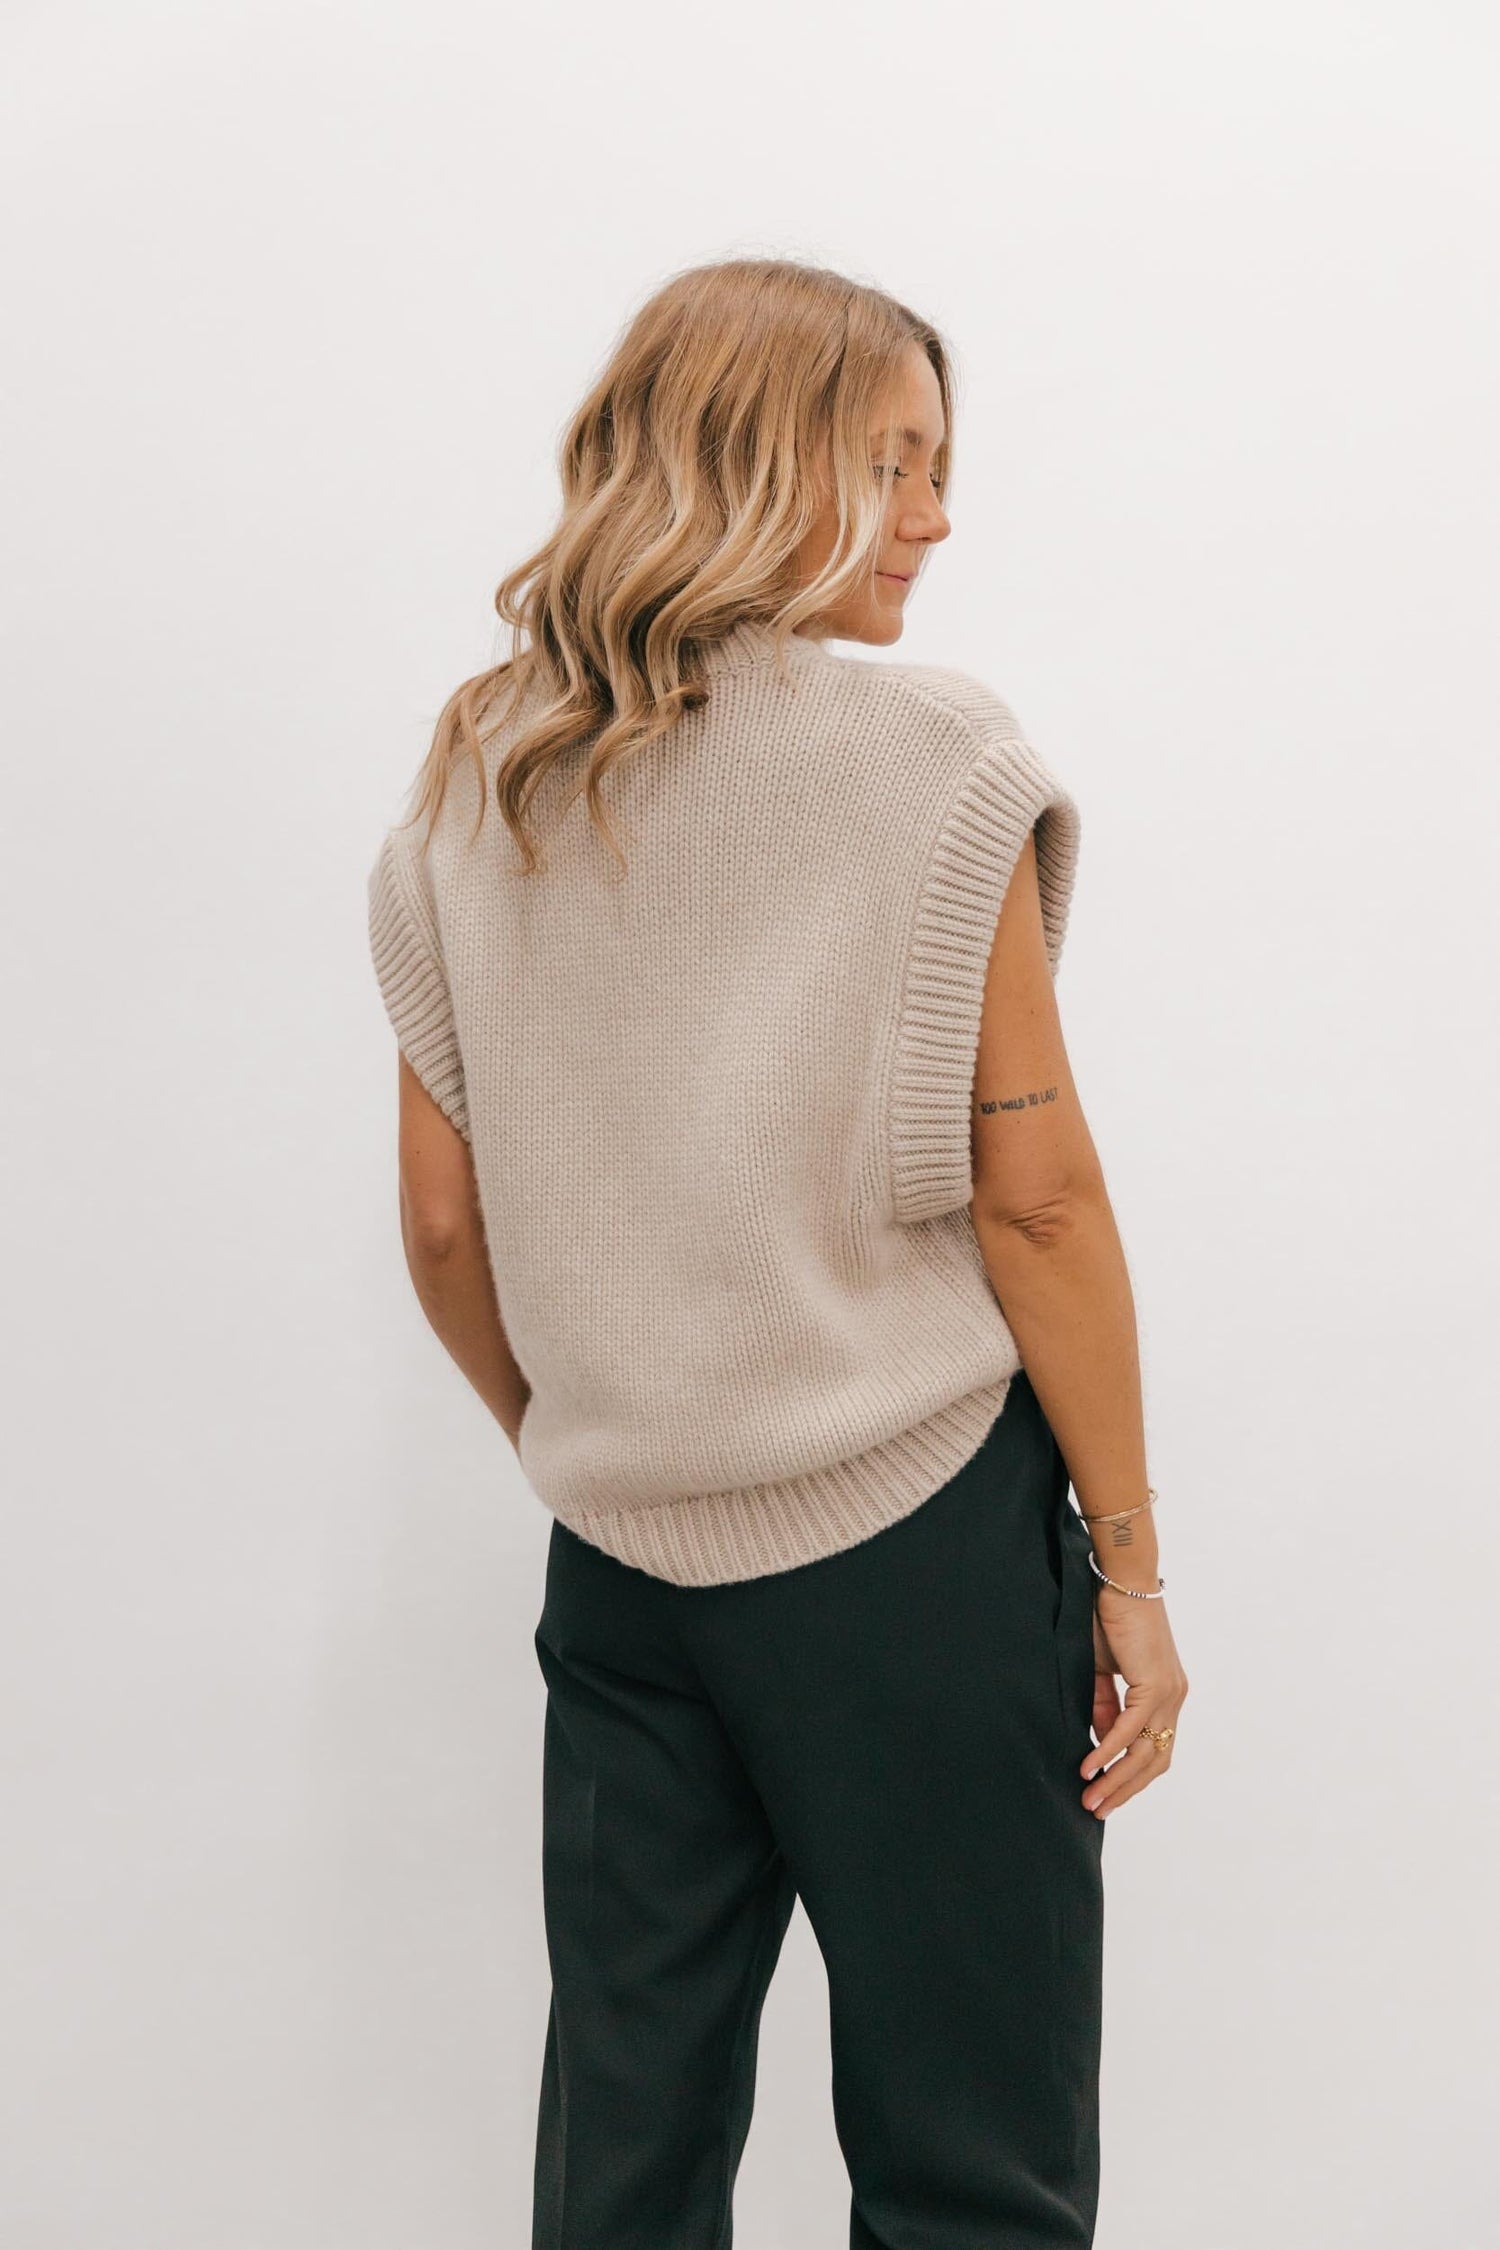 RORY SLEEVELESS CASHMERE SWEATER IN SAND SWEATER LISA YANG 